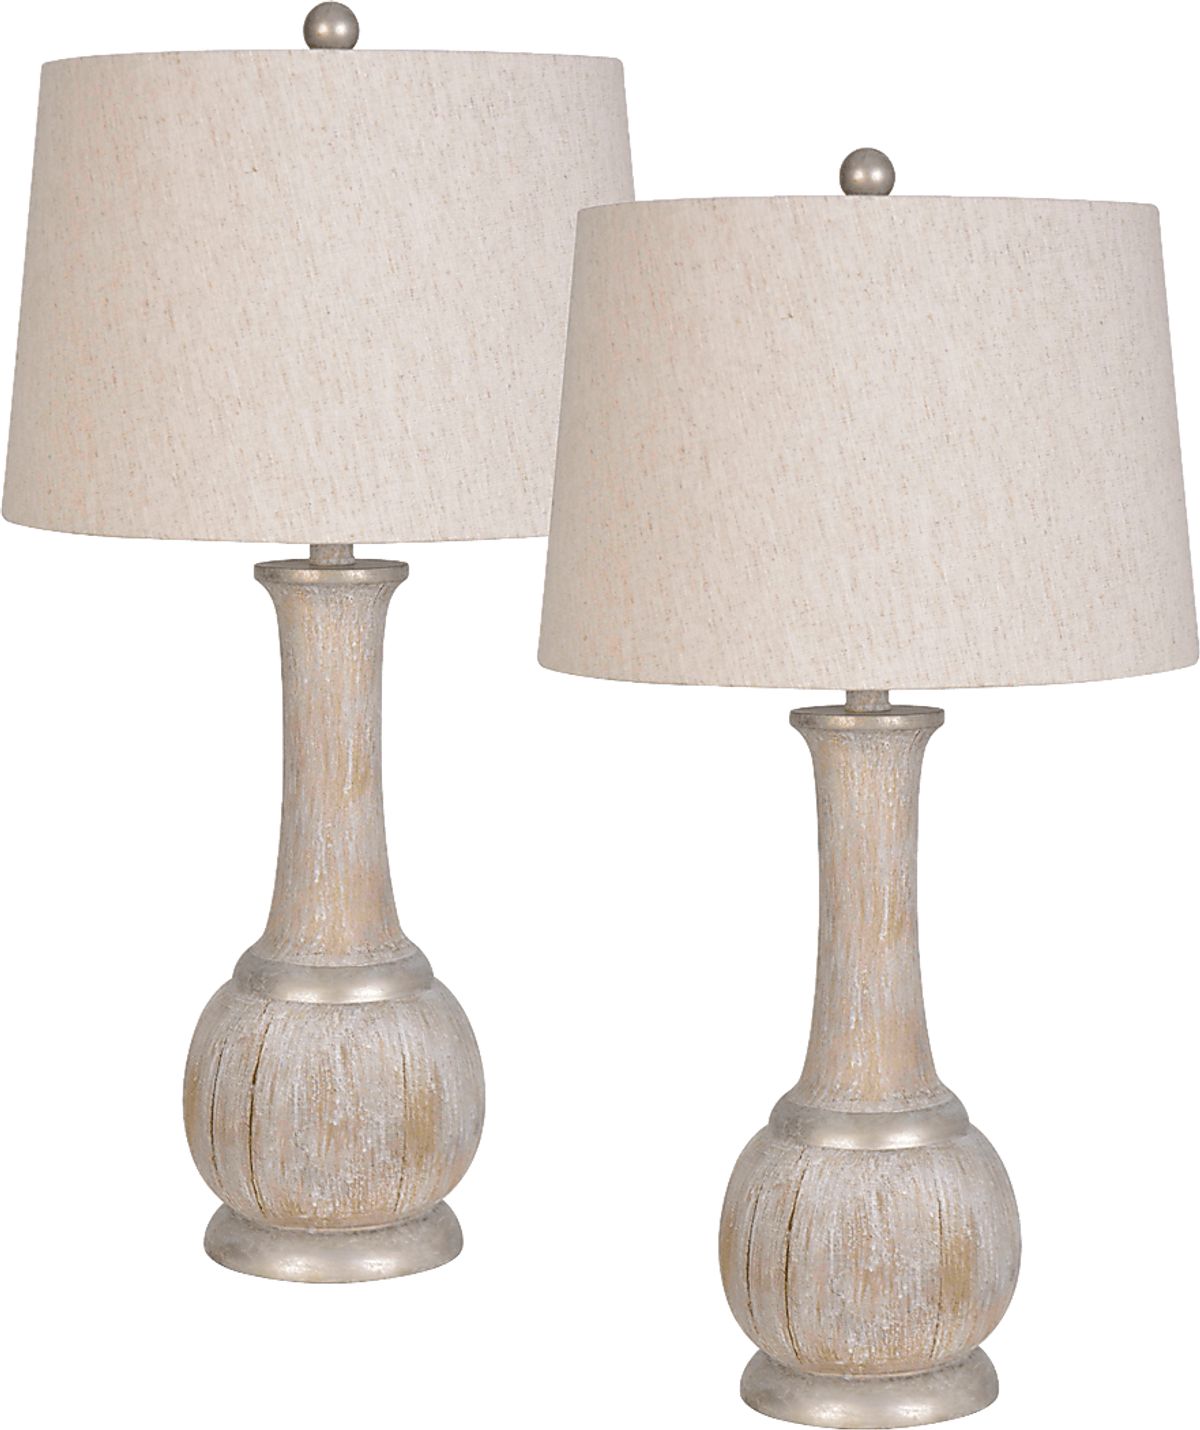 Bello View Beige Set Of 2 Lamps | Rooms to Go